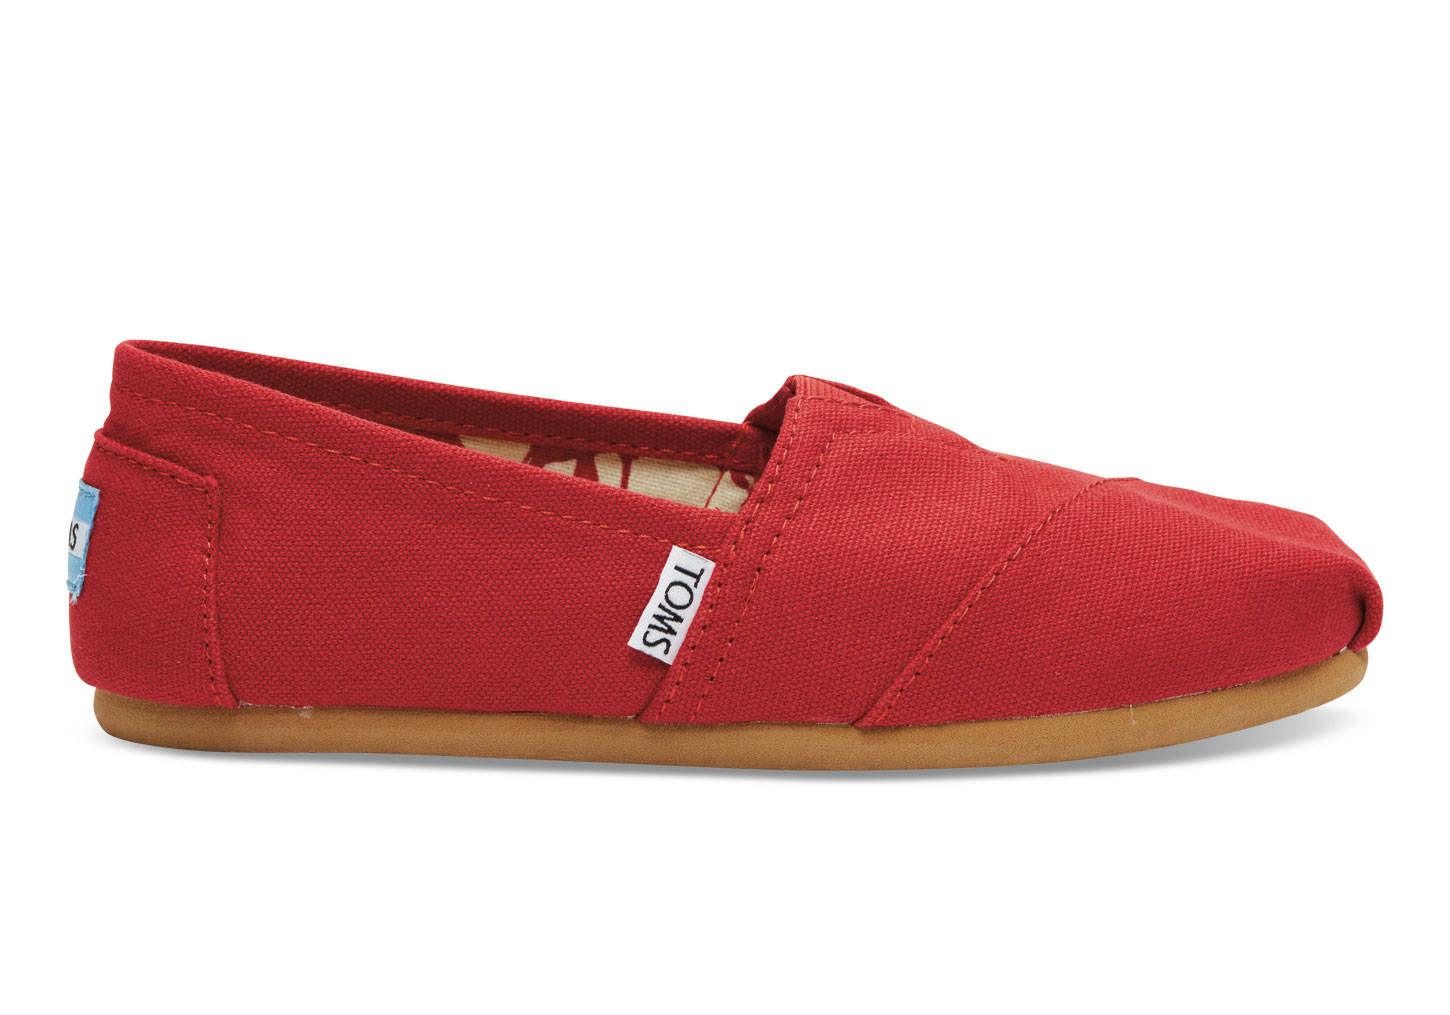 Women's Classic Toms Check for local delivery - Joy-Per's Shoes